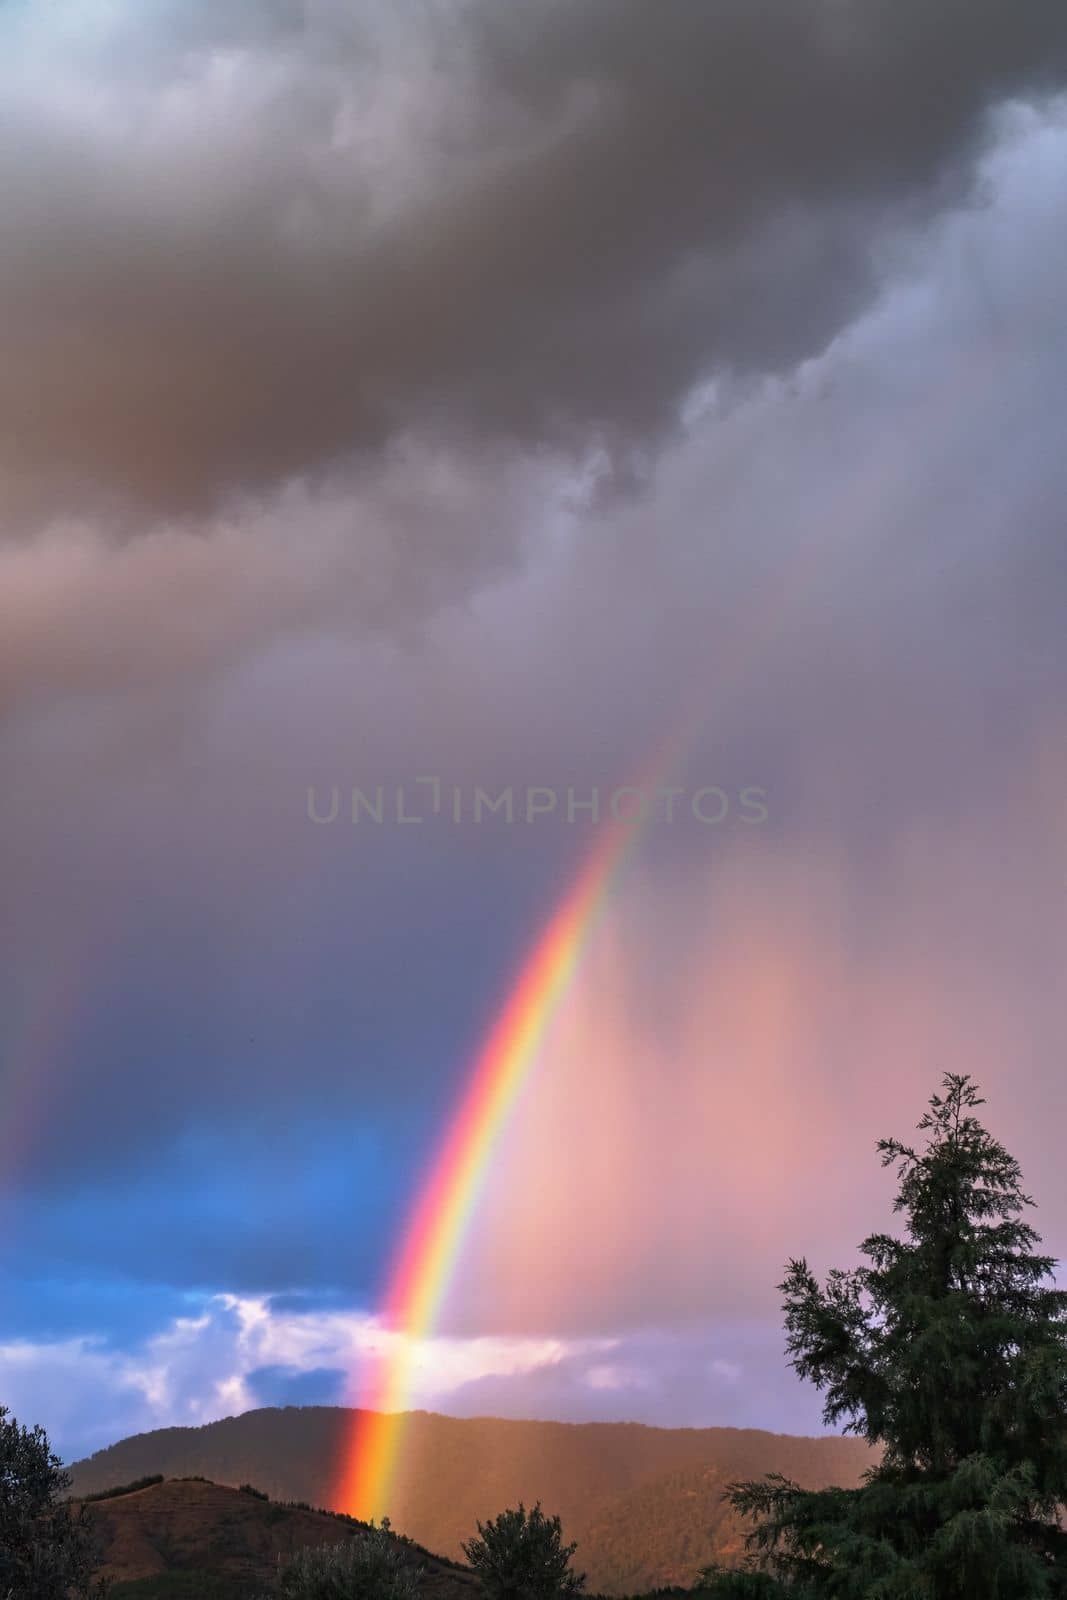 Rays of the sun breaking through the stormy sky, forming a marvelous rainbow by koldunov